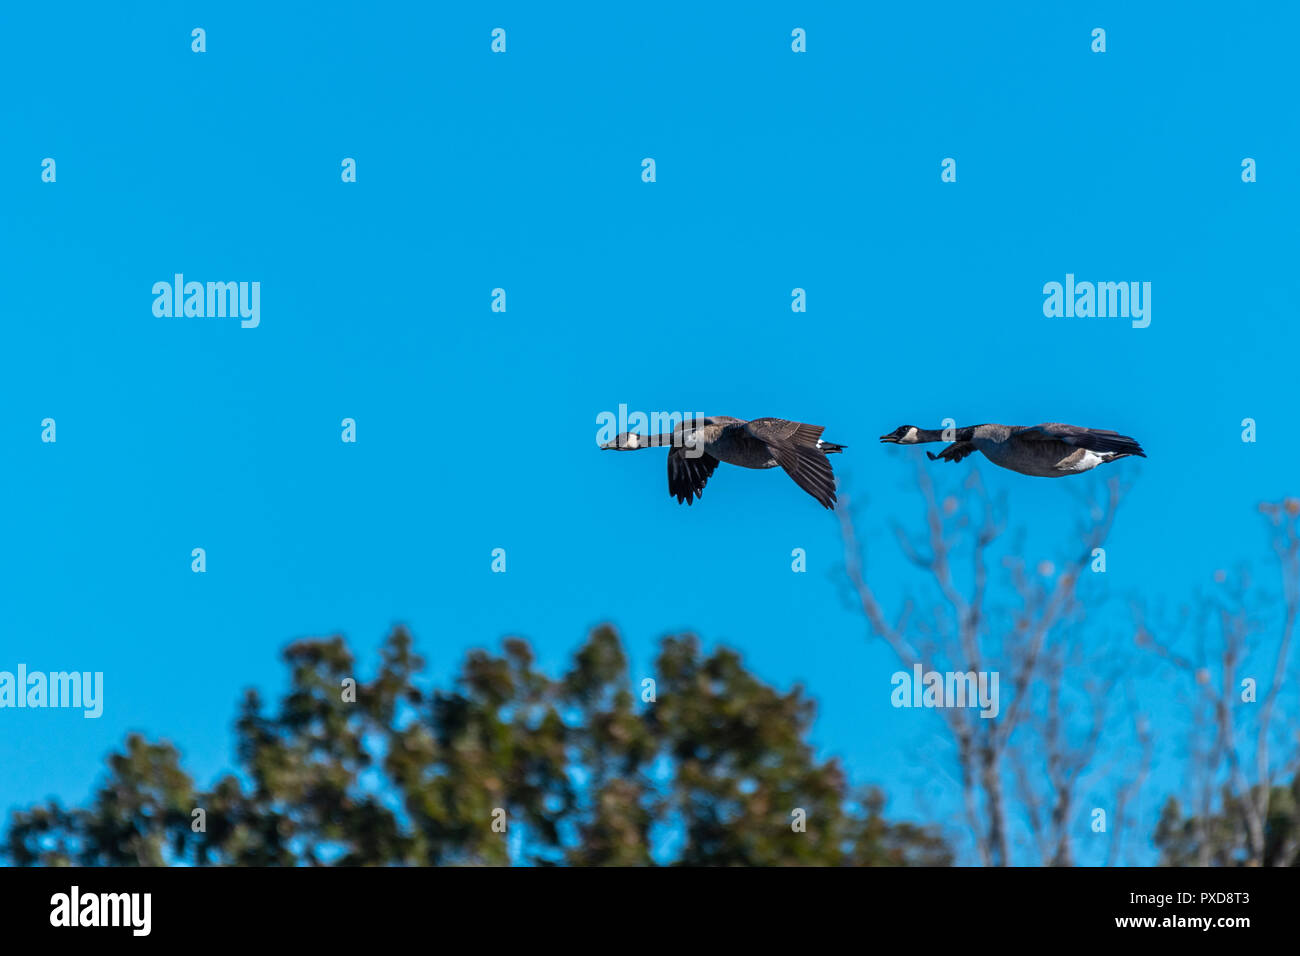 Two Canada Geese (Branta canadensis) flying over trees. Stock Photo